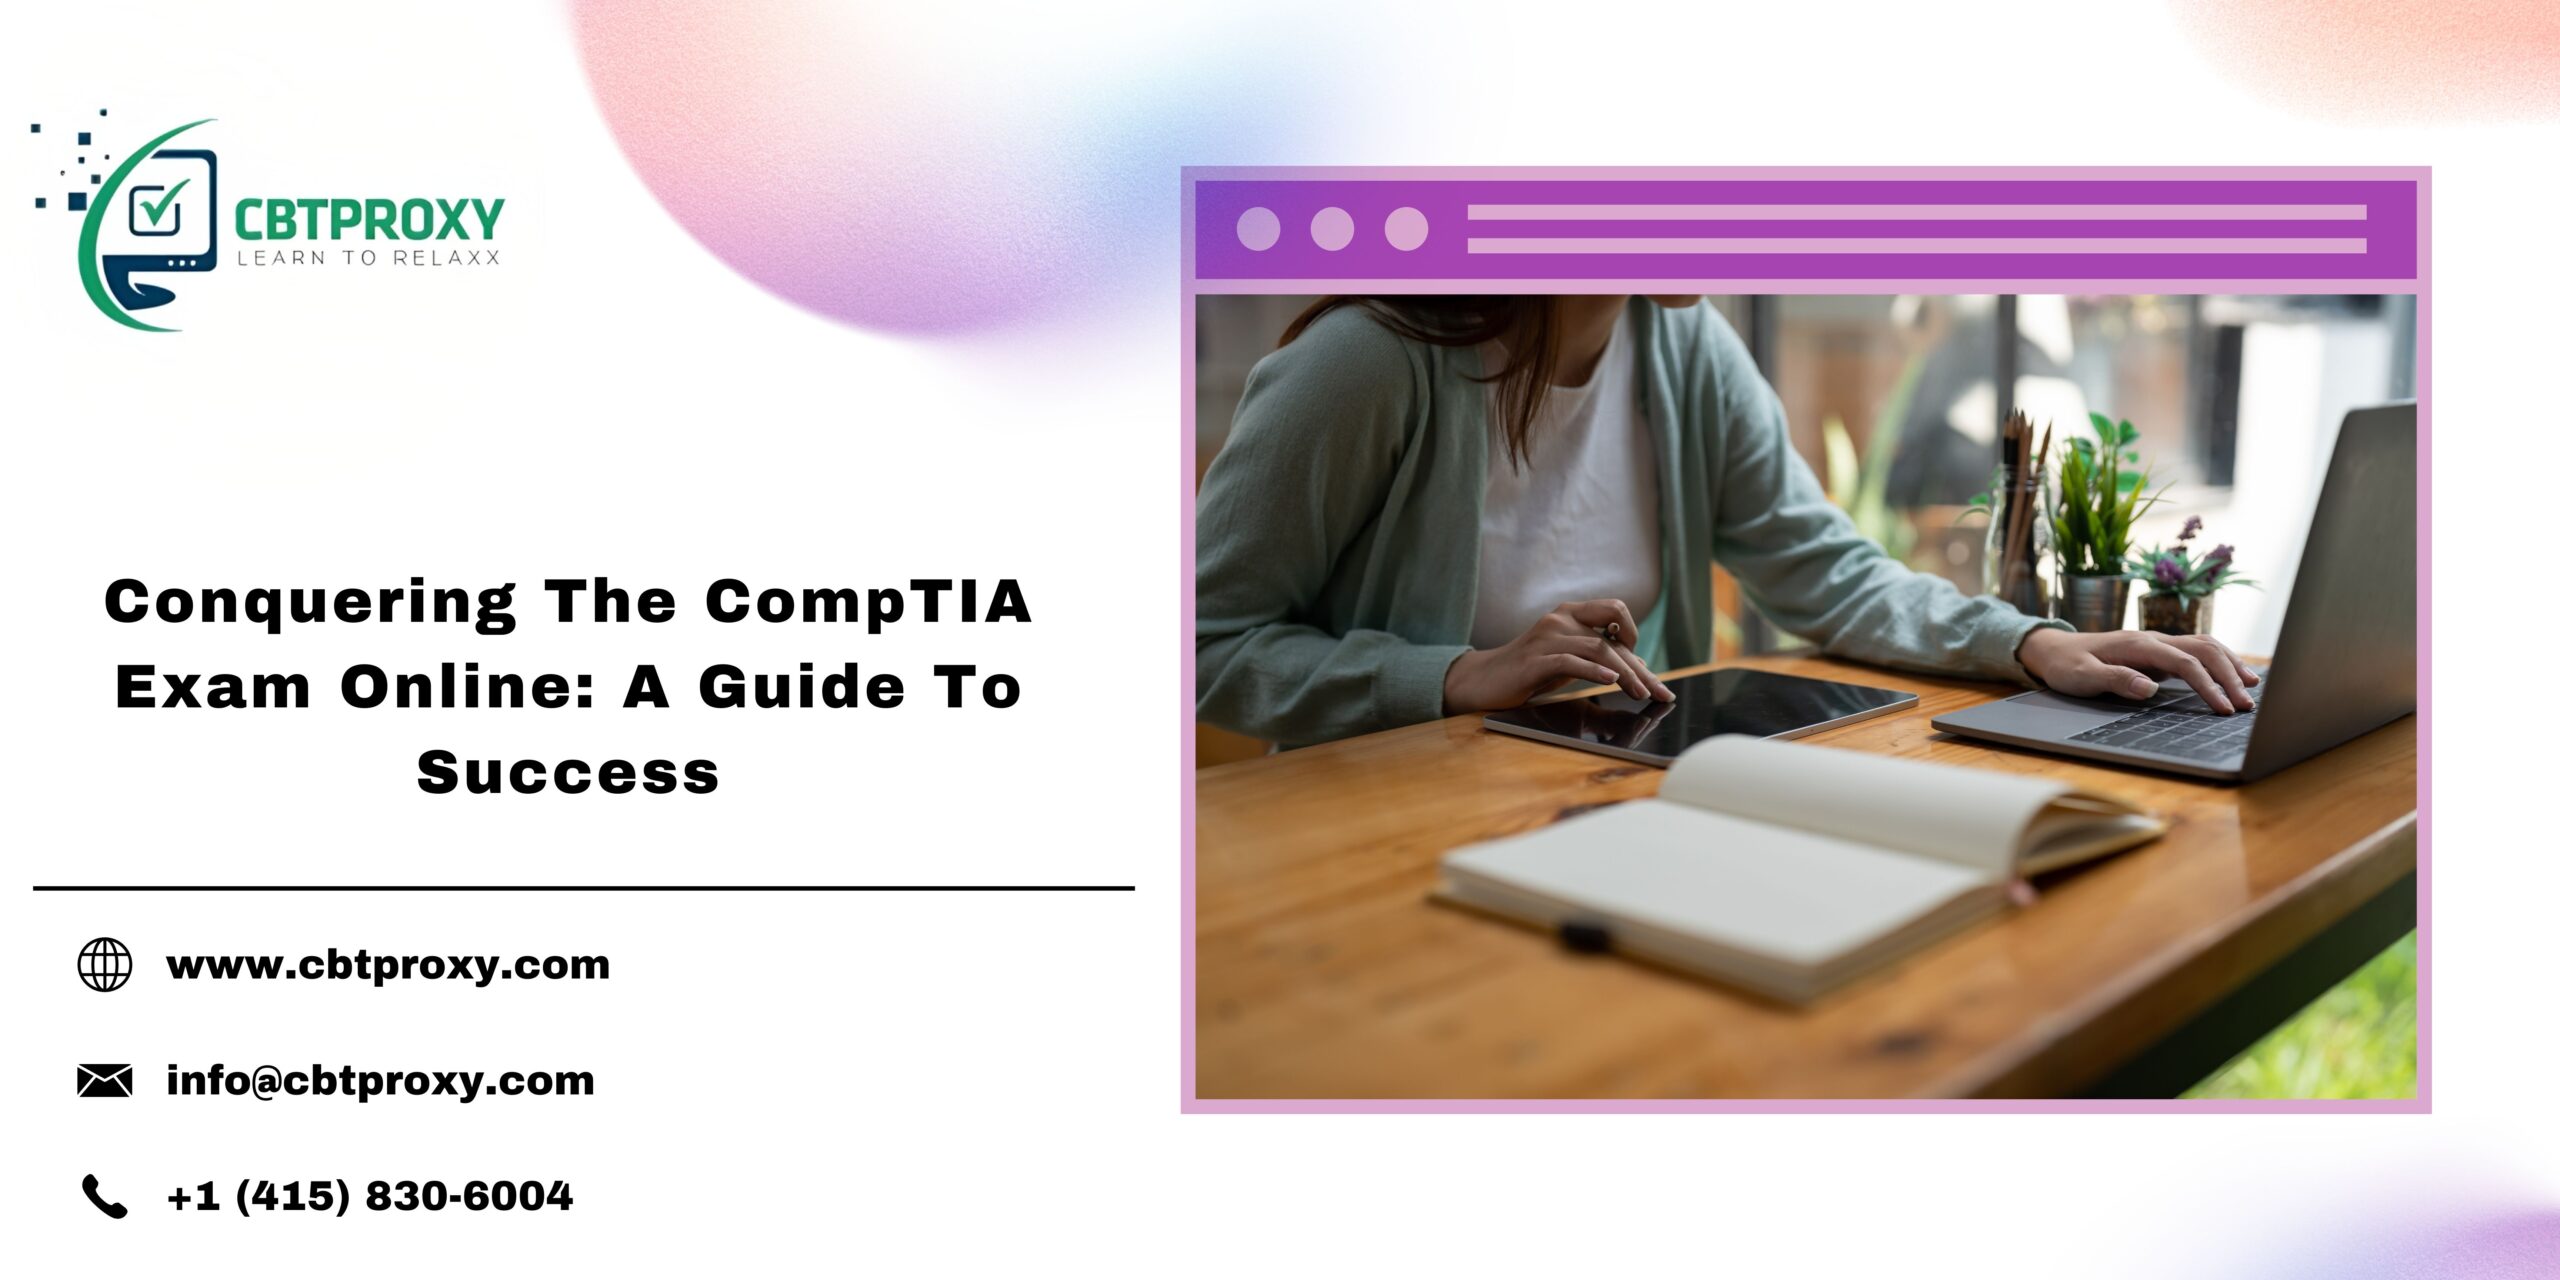 Conquering The CompTIA Exam Online: A Guide To Success